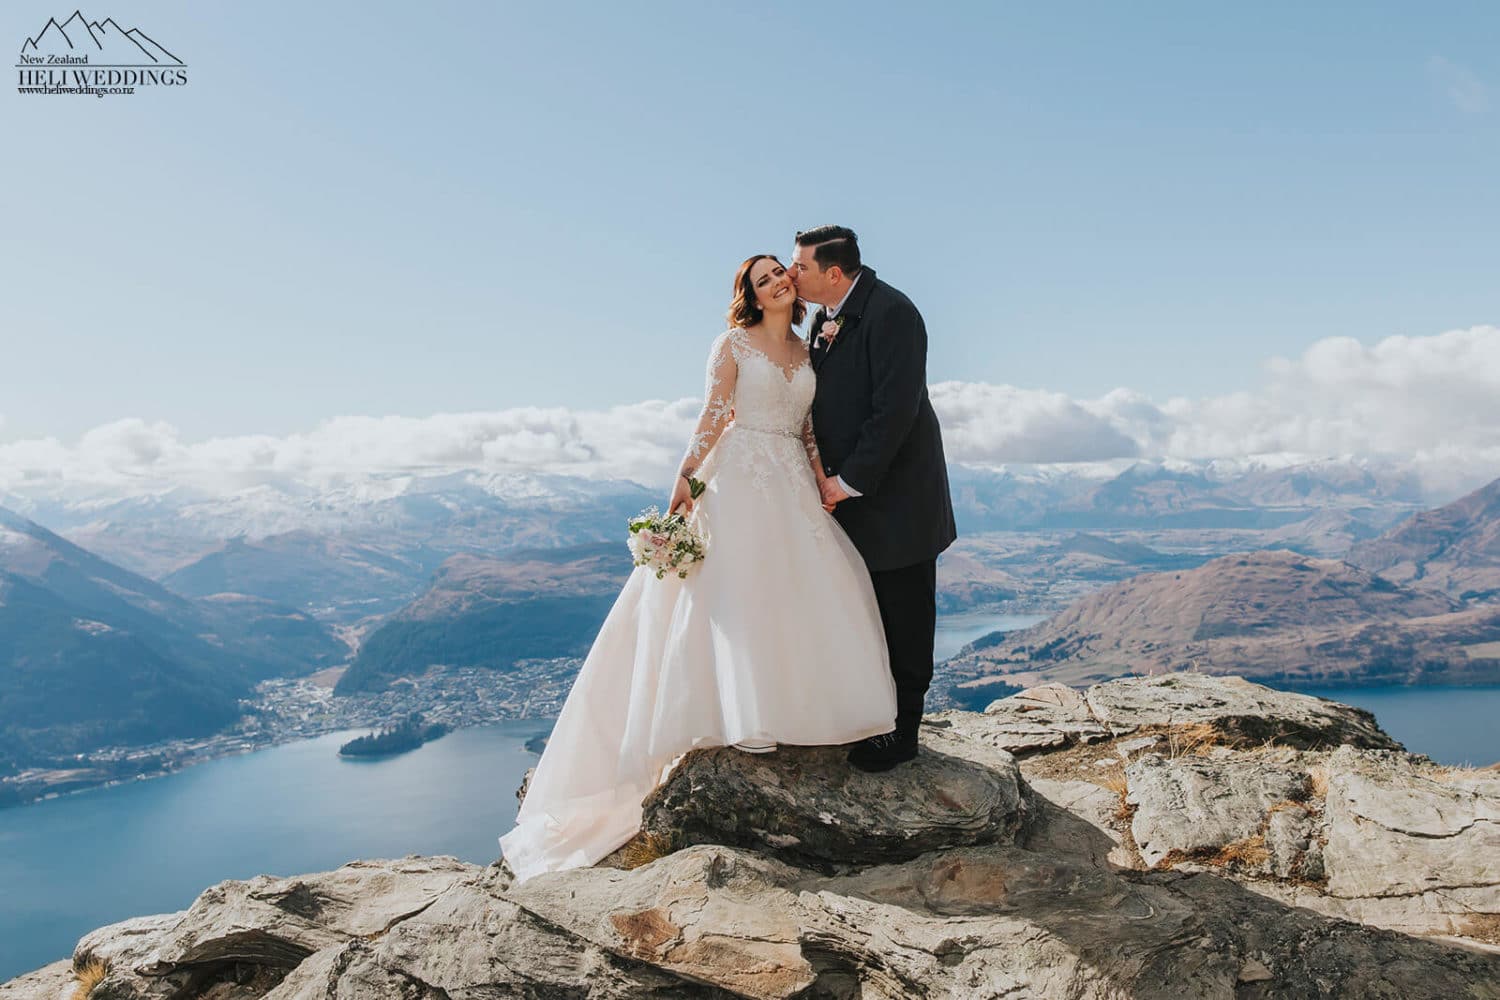 Groom kissing bride in the mountains